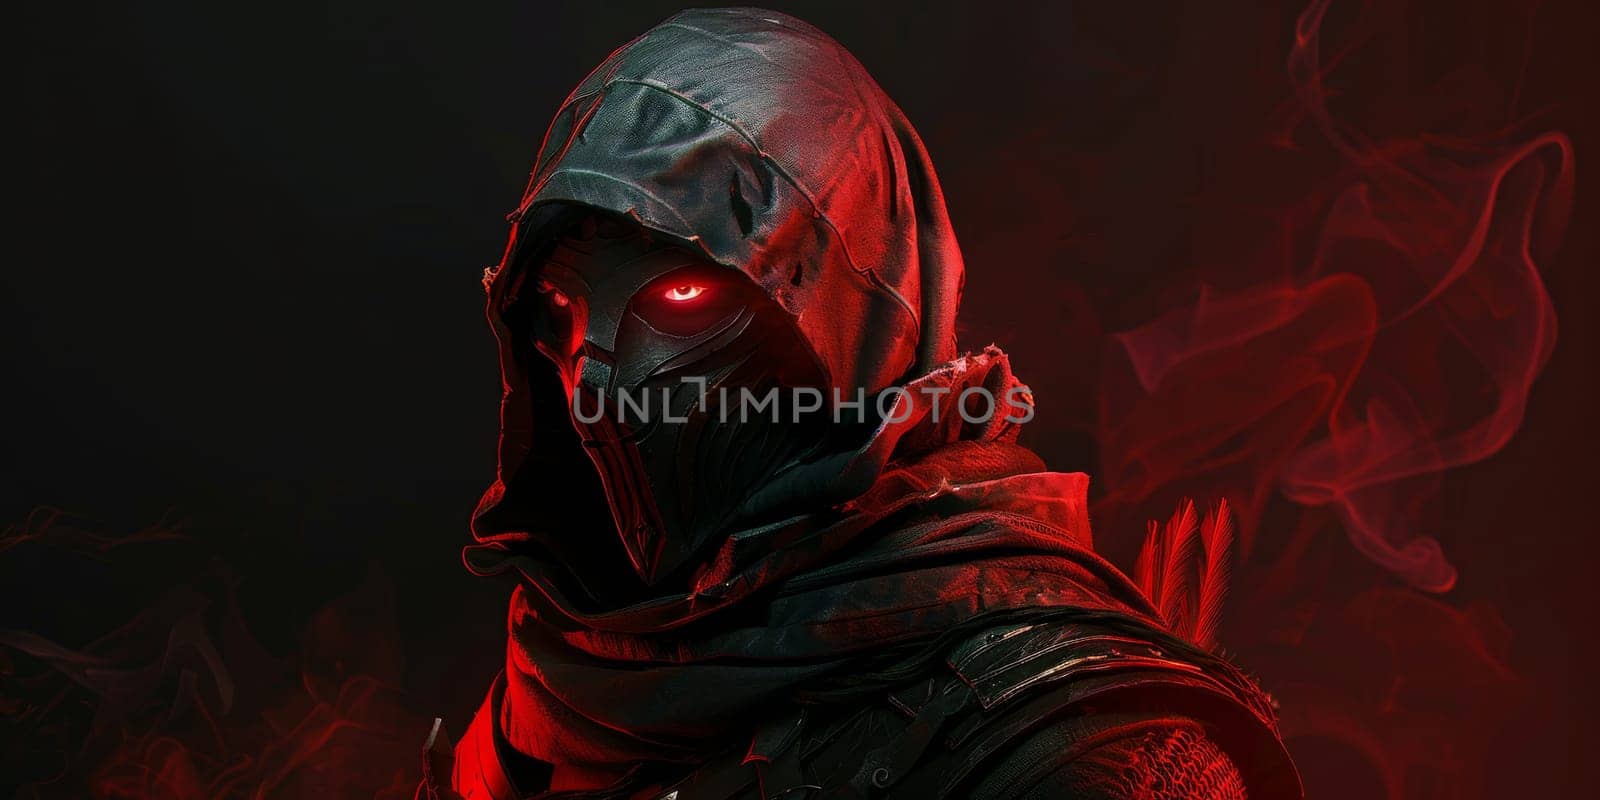 A man assassin wearing a red hooded suit with a red eyes